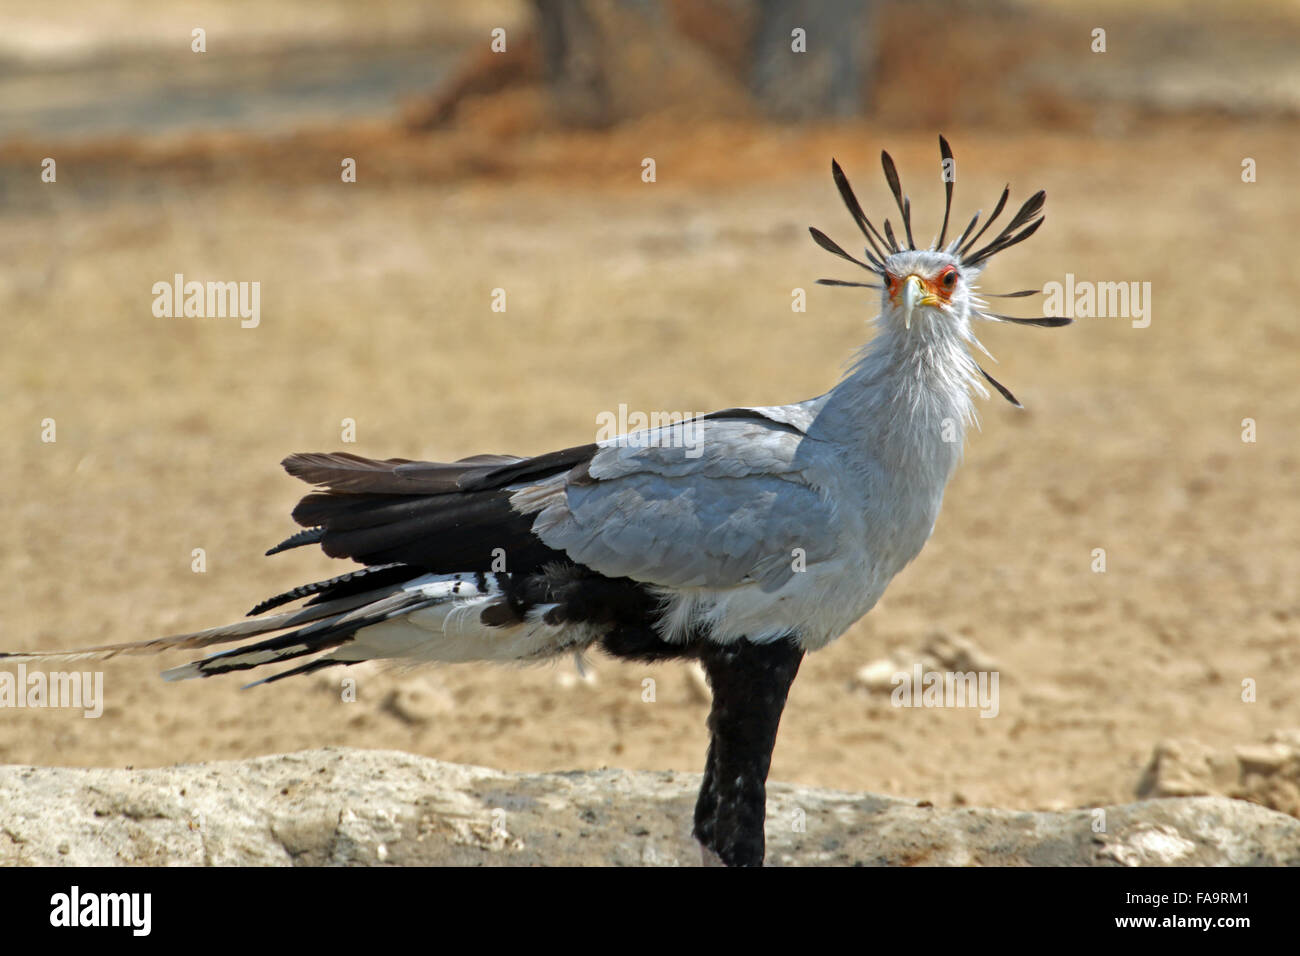 Secretary Bird with crested feathers spread out in the desert at the Kgalagadi Transfrontier National Park Northern Cape South Africa Stock Photo